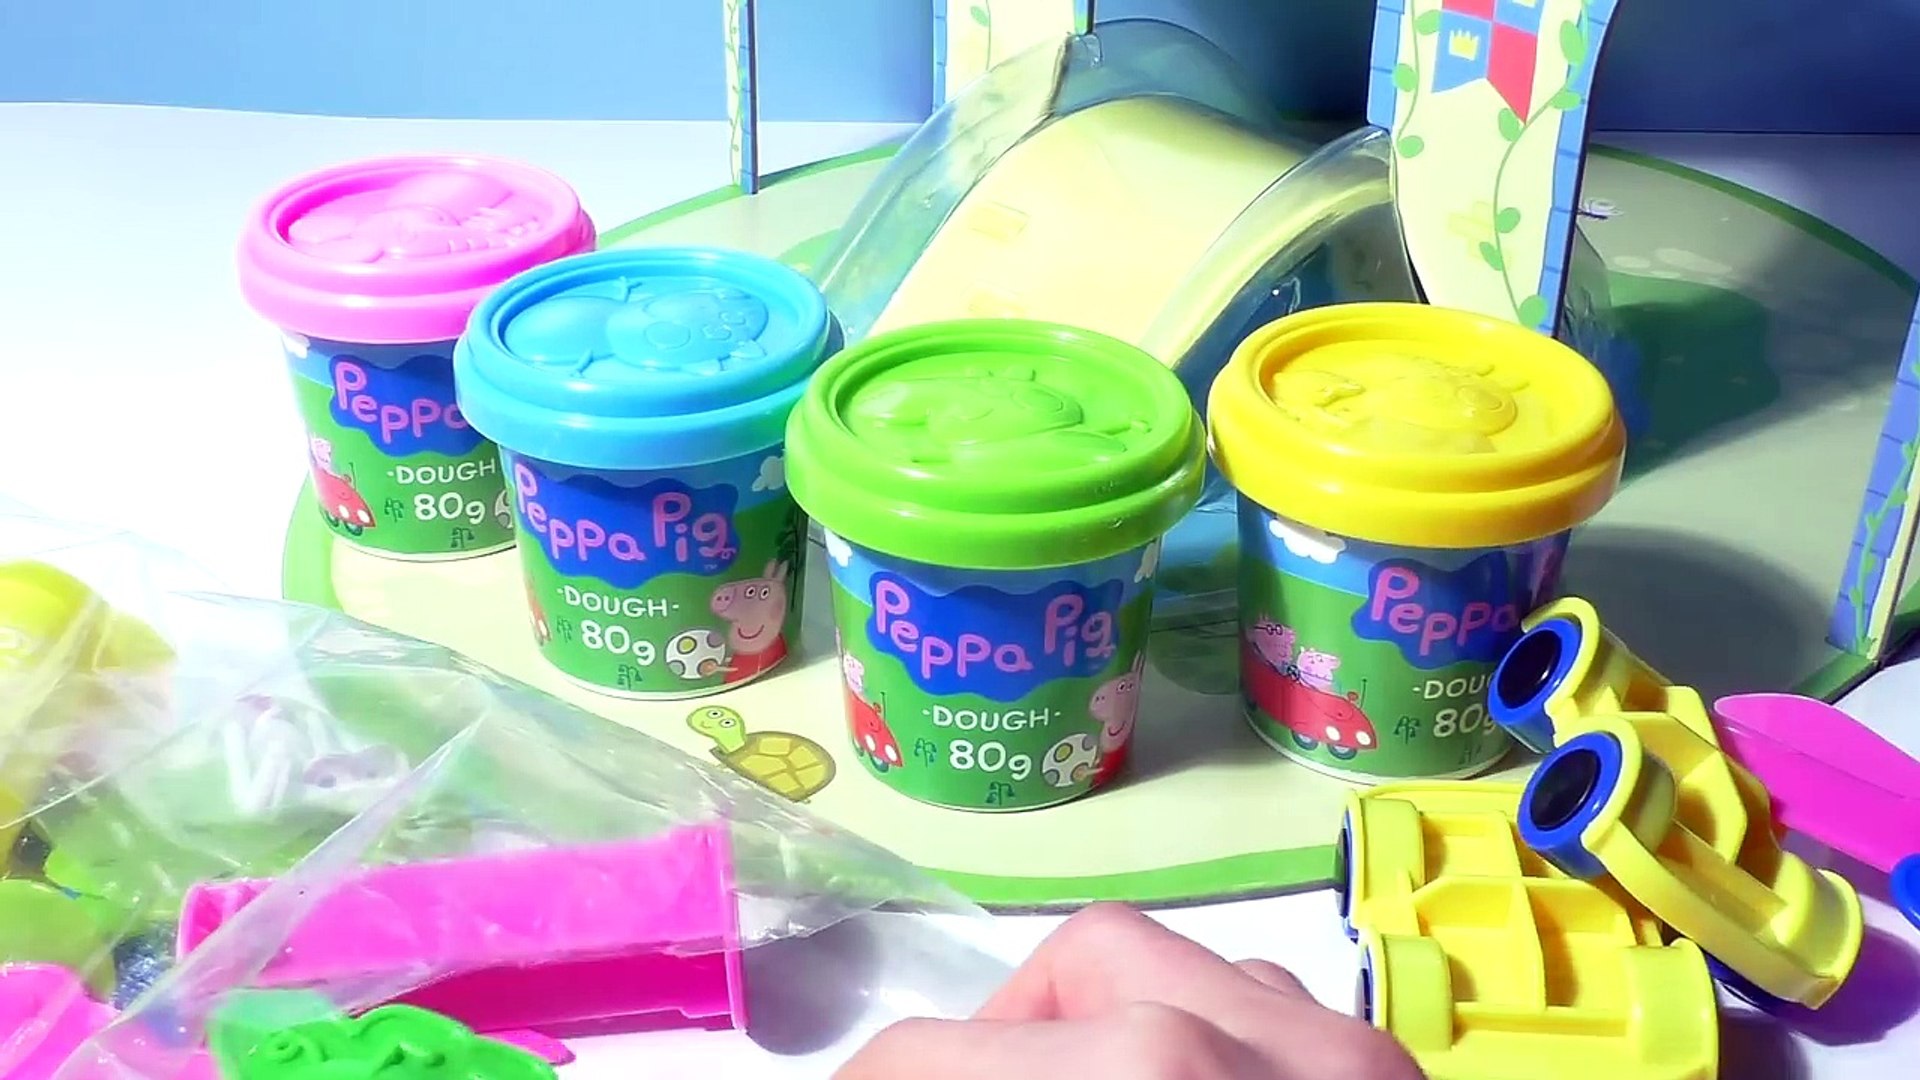 Peppa Pig Castle Dough Play-Doh Games Playset Kids Fun Toys Review Playdoh  - video dailymotion